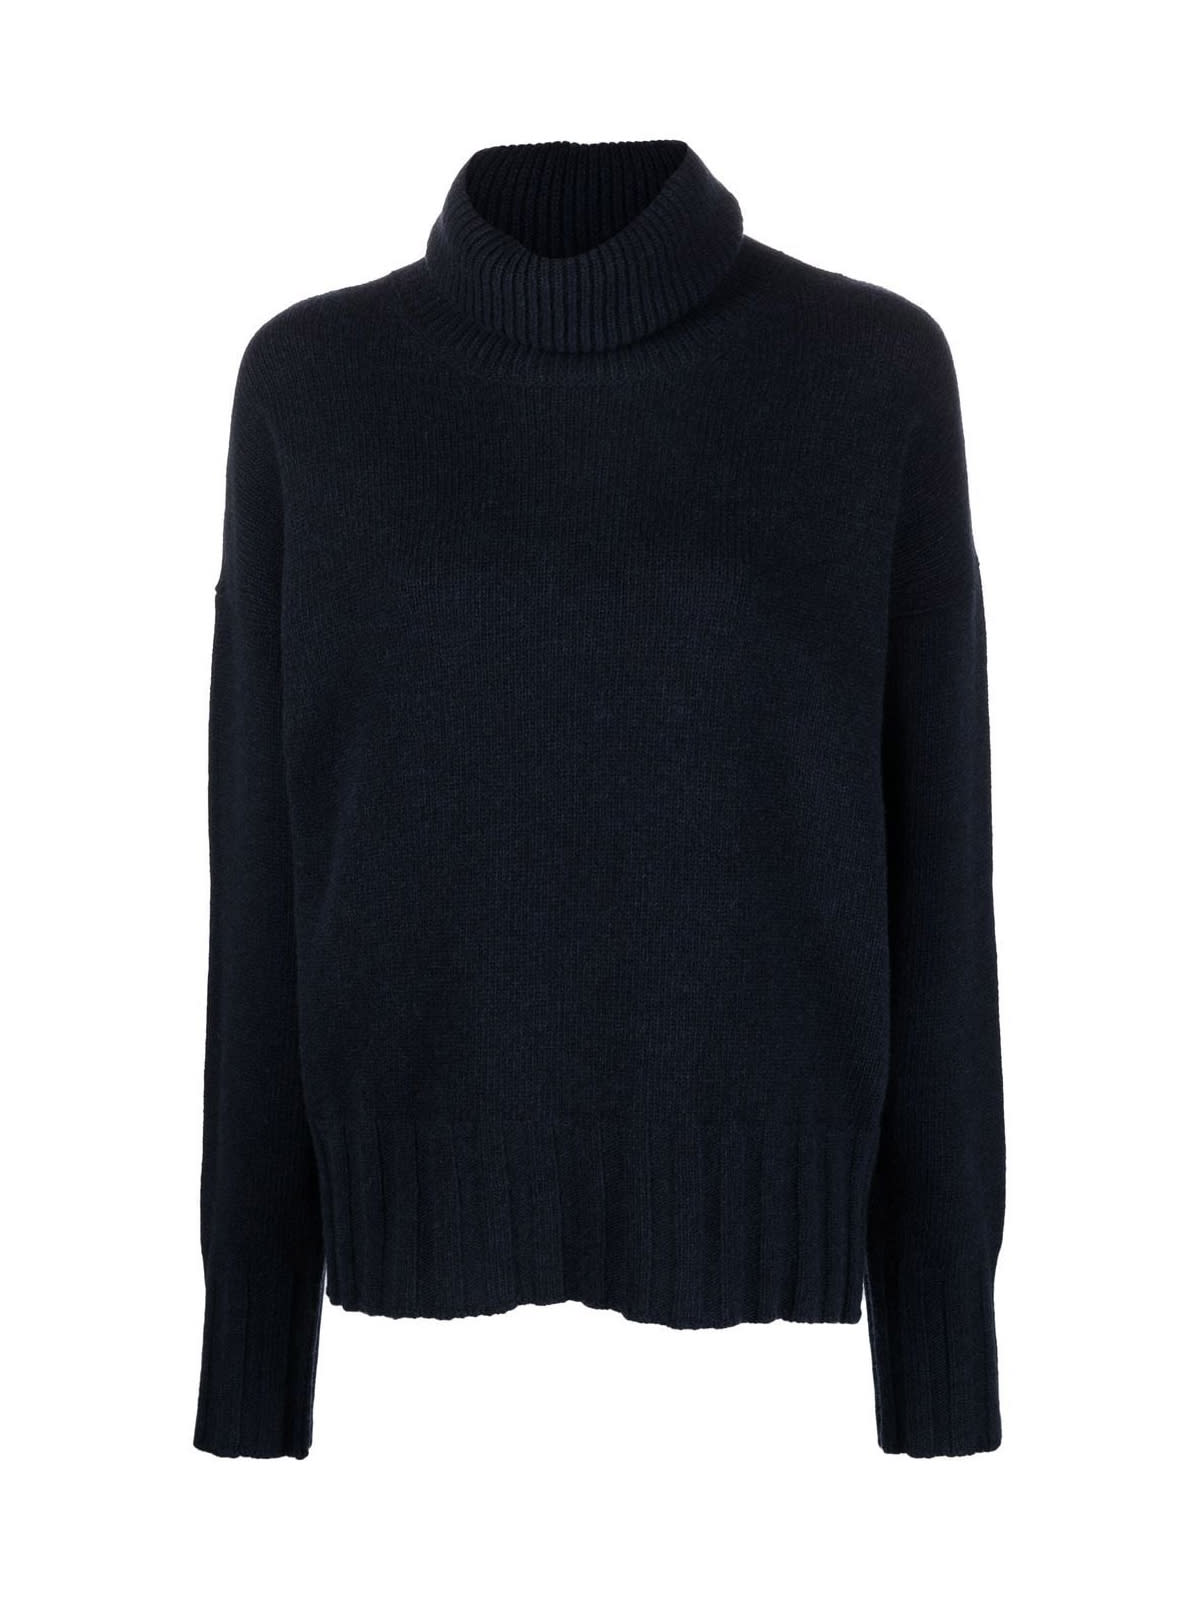 Made in Tomboy Ely Turtleneck